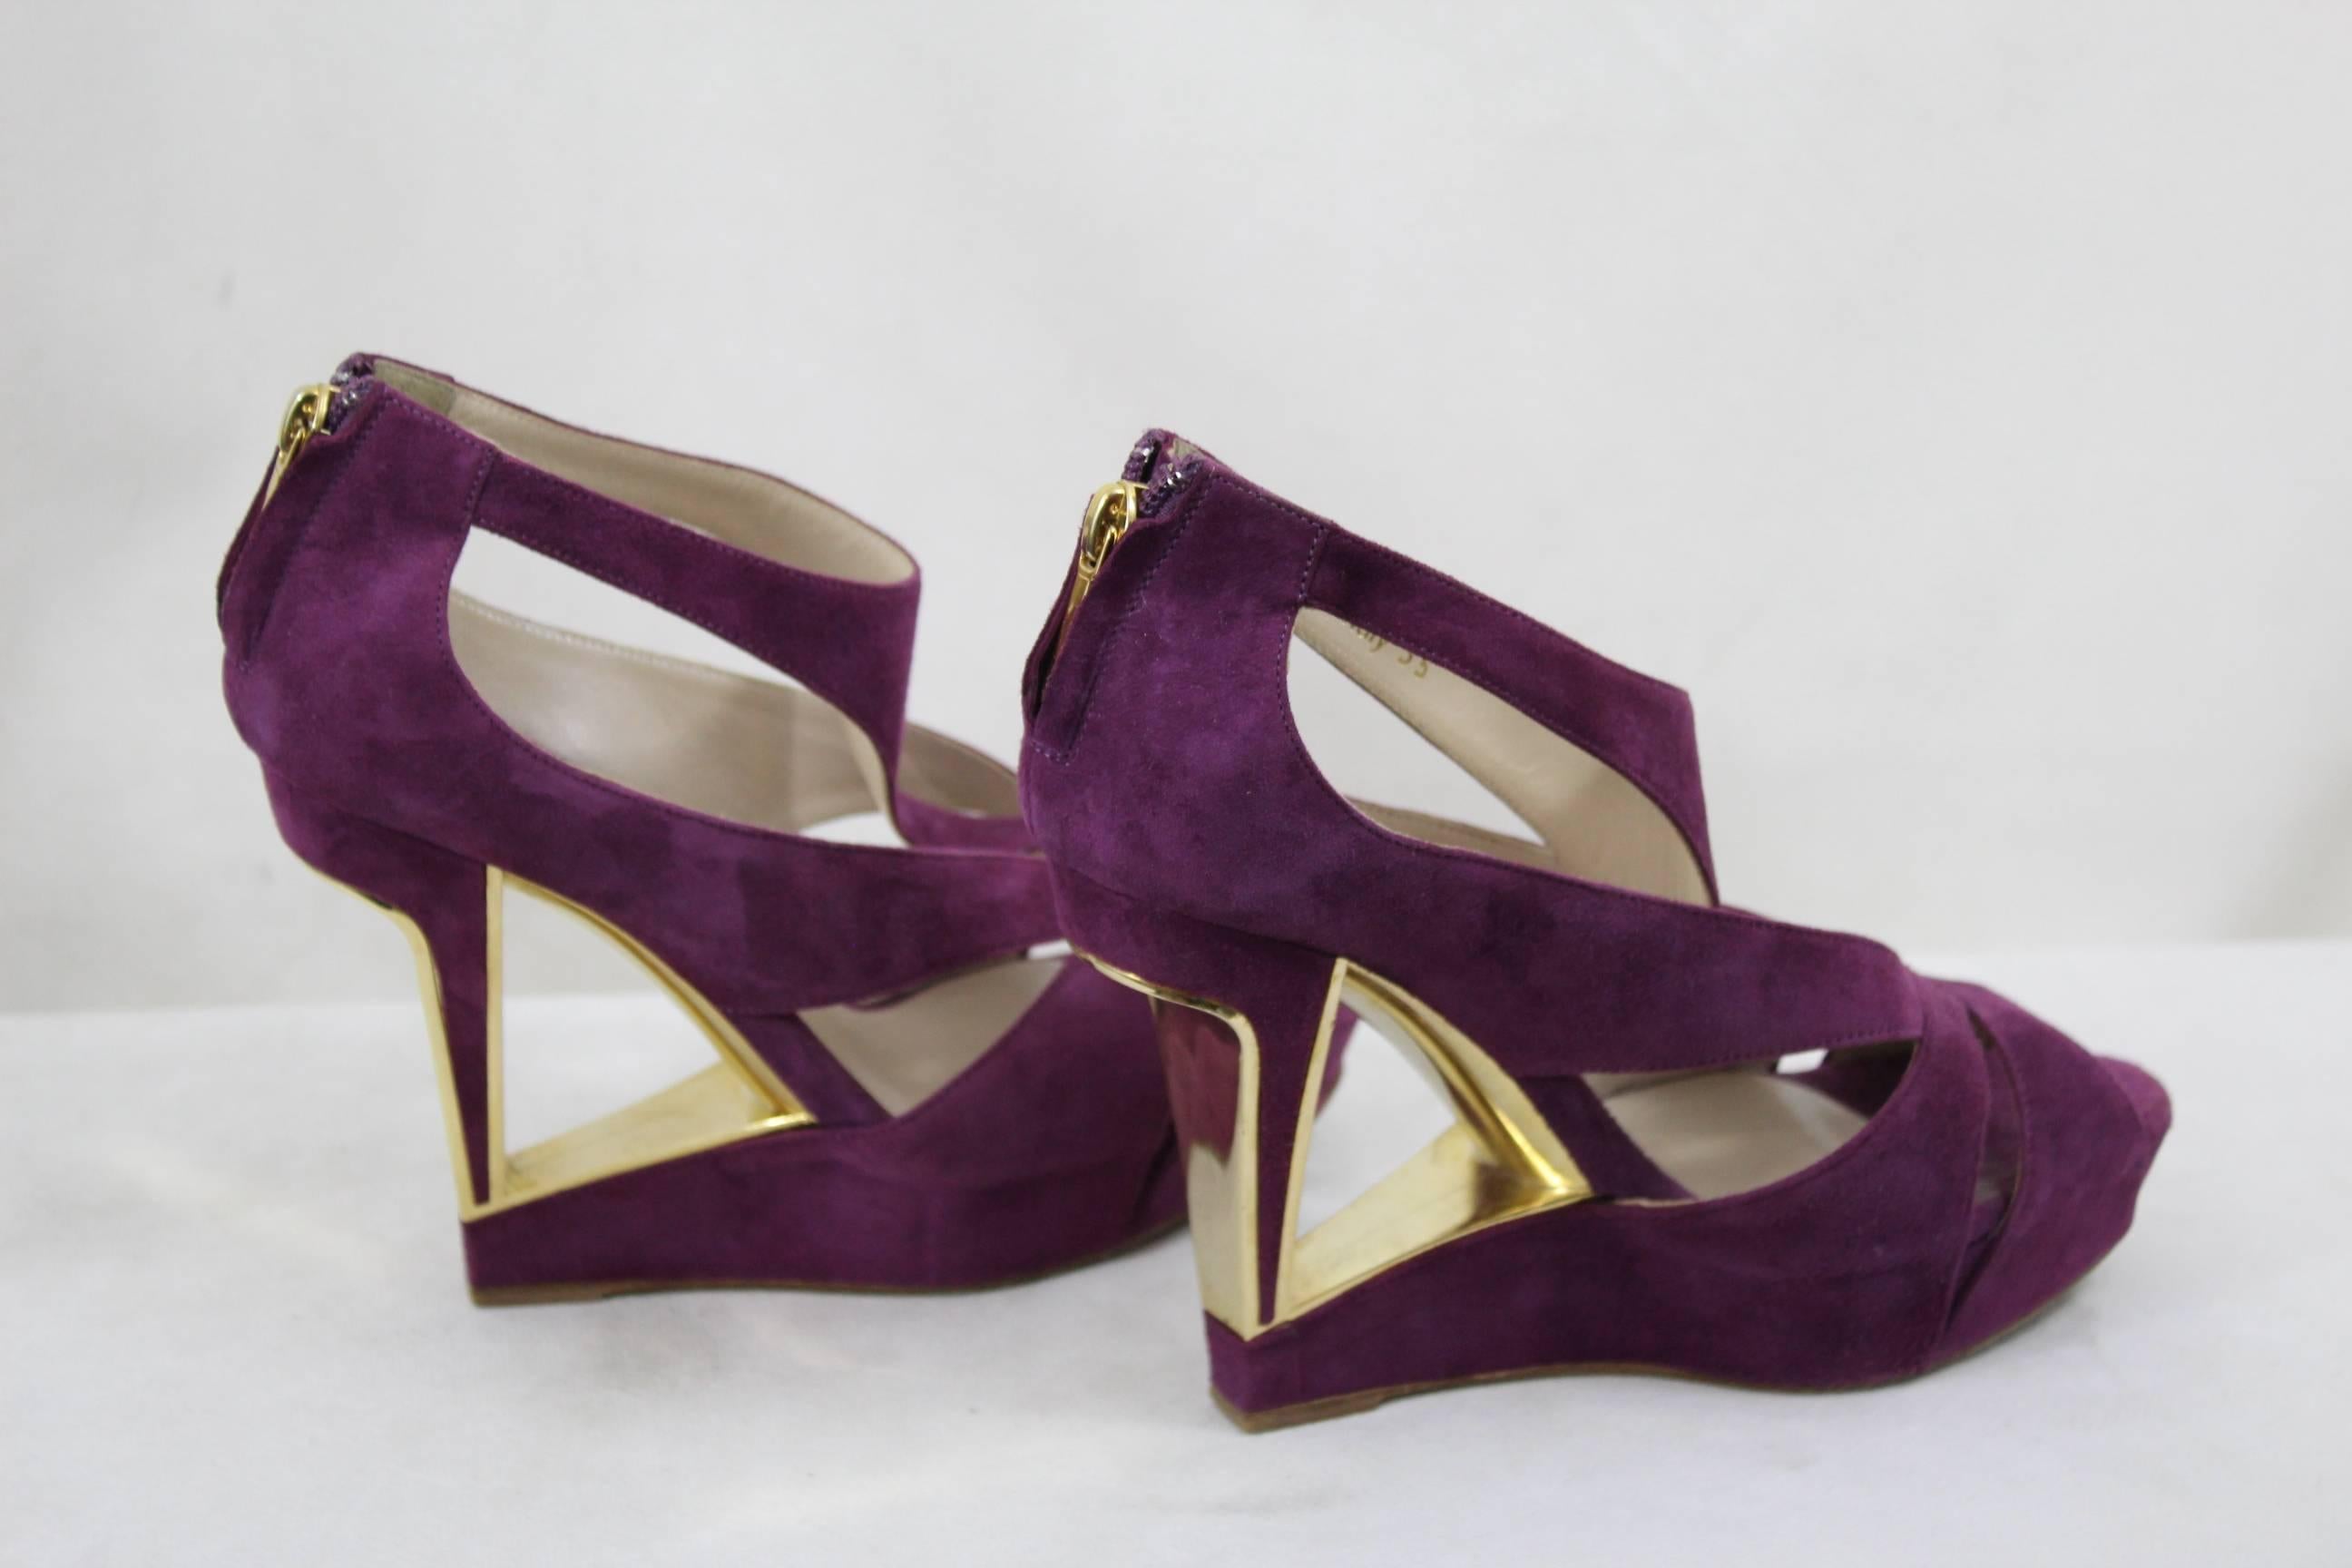 Awesome Chriistian Dior in purple suede and architectural heel. Closing with zip in the back.

Good condition however they have been used.
Size 35